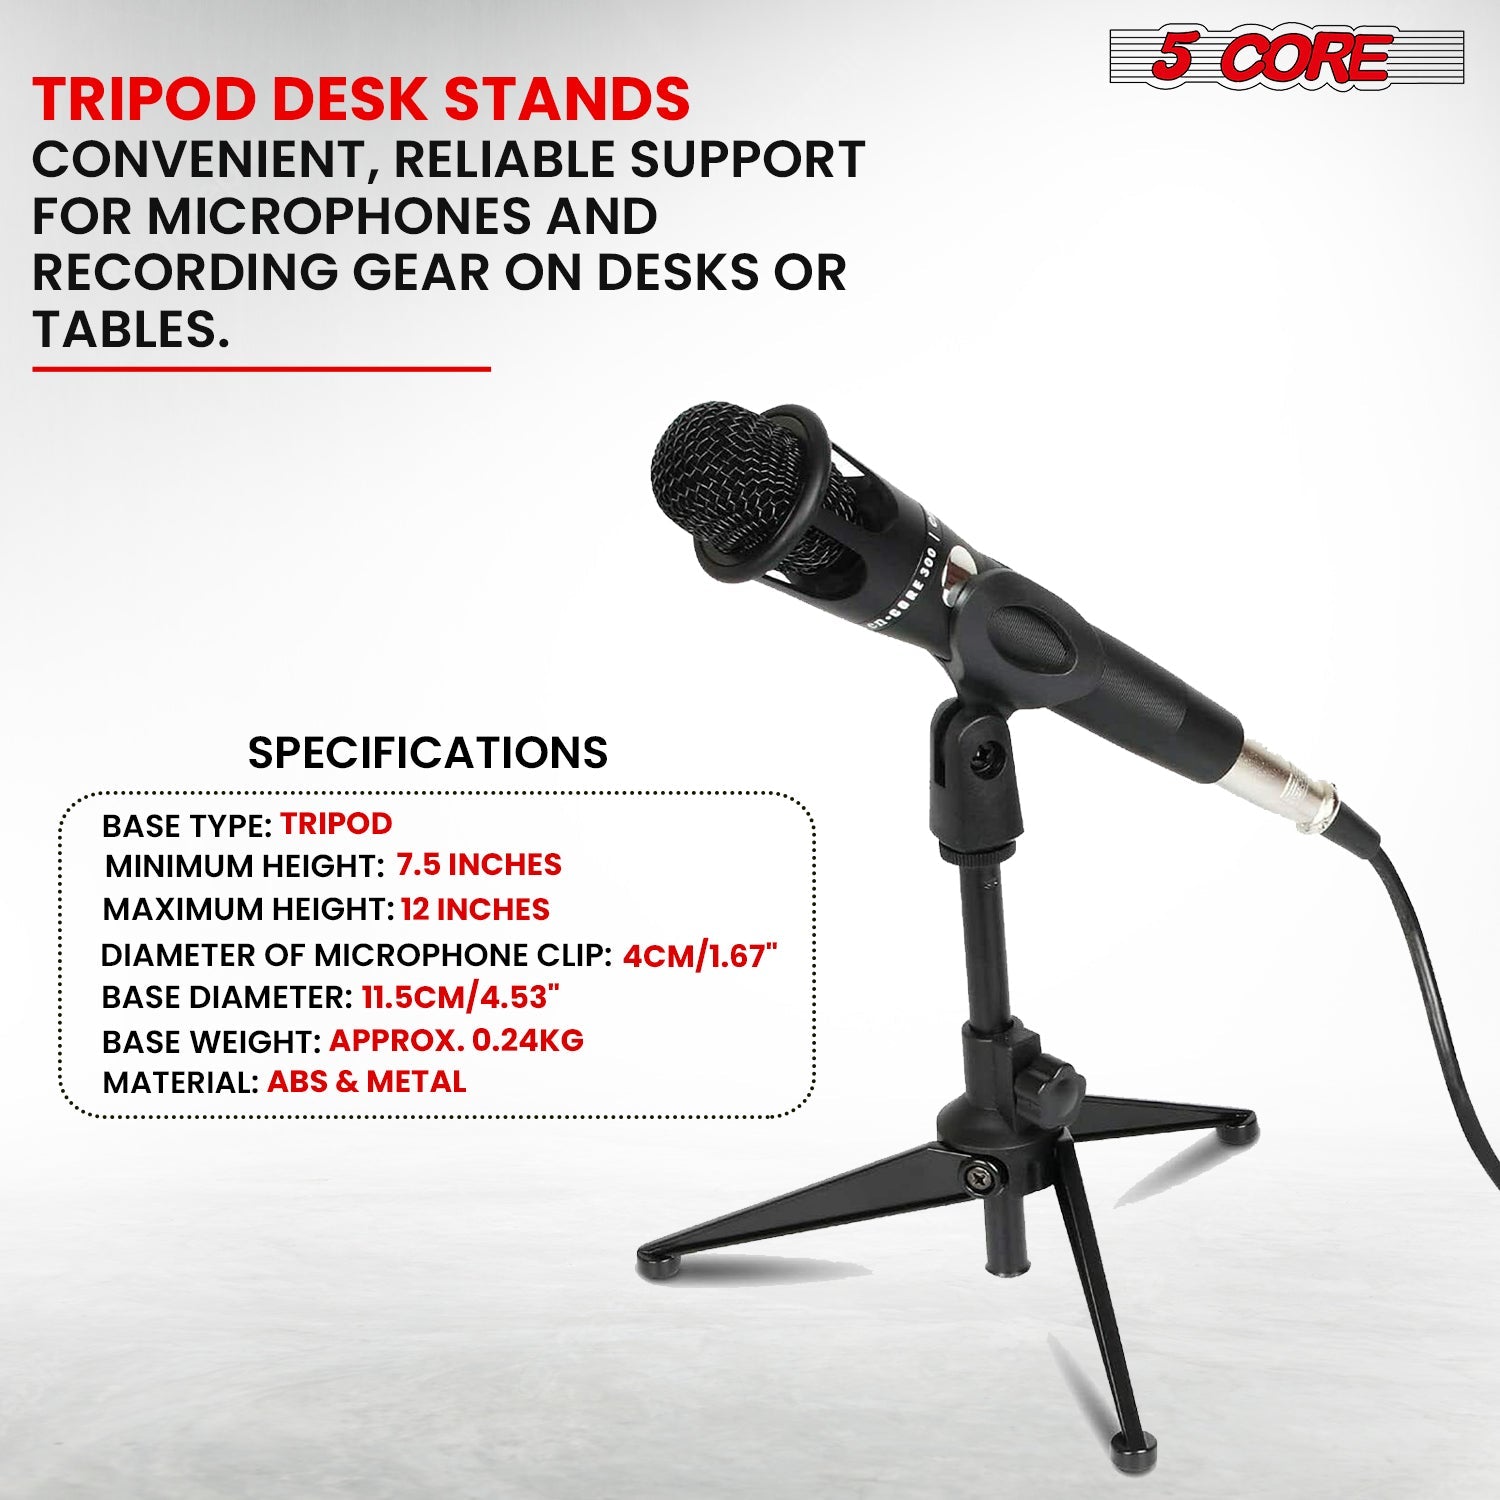 Sturdy Tripod Mic Stand for Table Top Use: 5 Core Adjustable Height